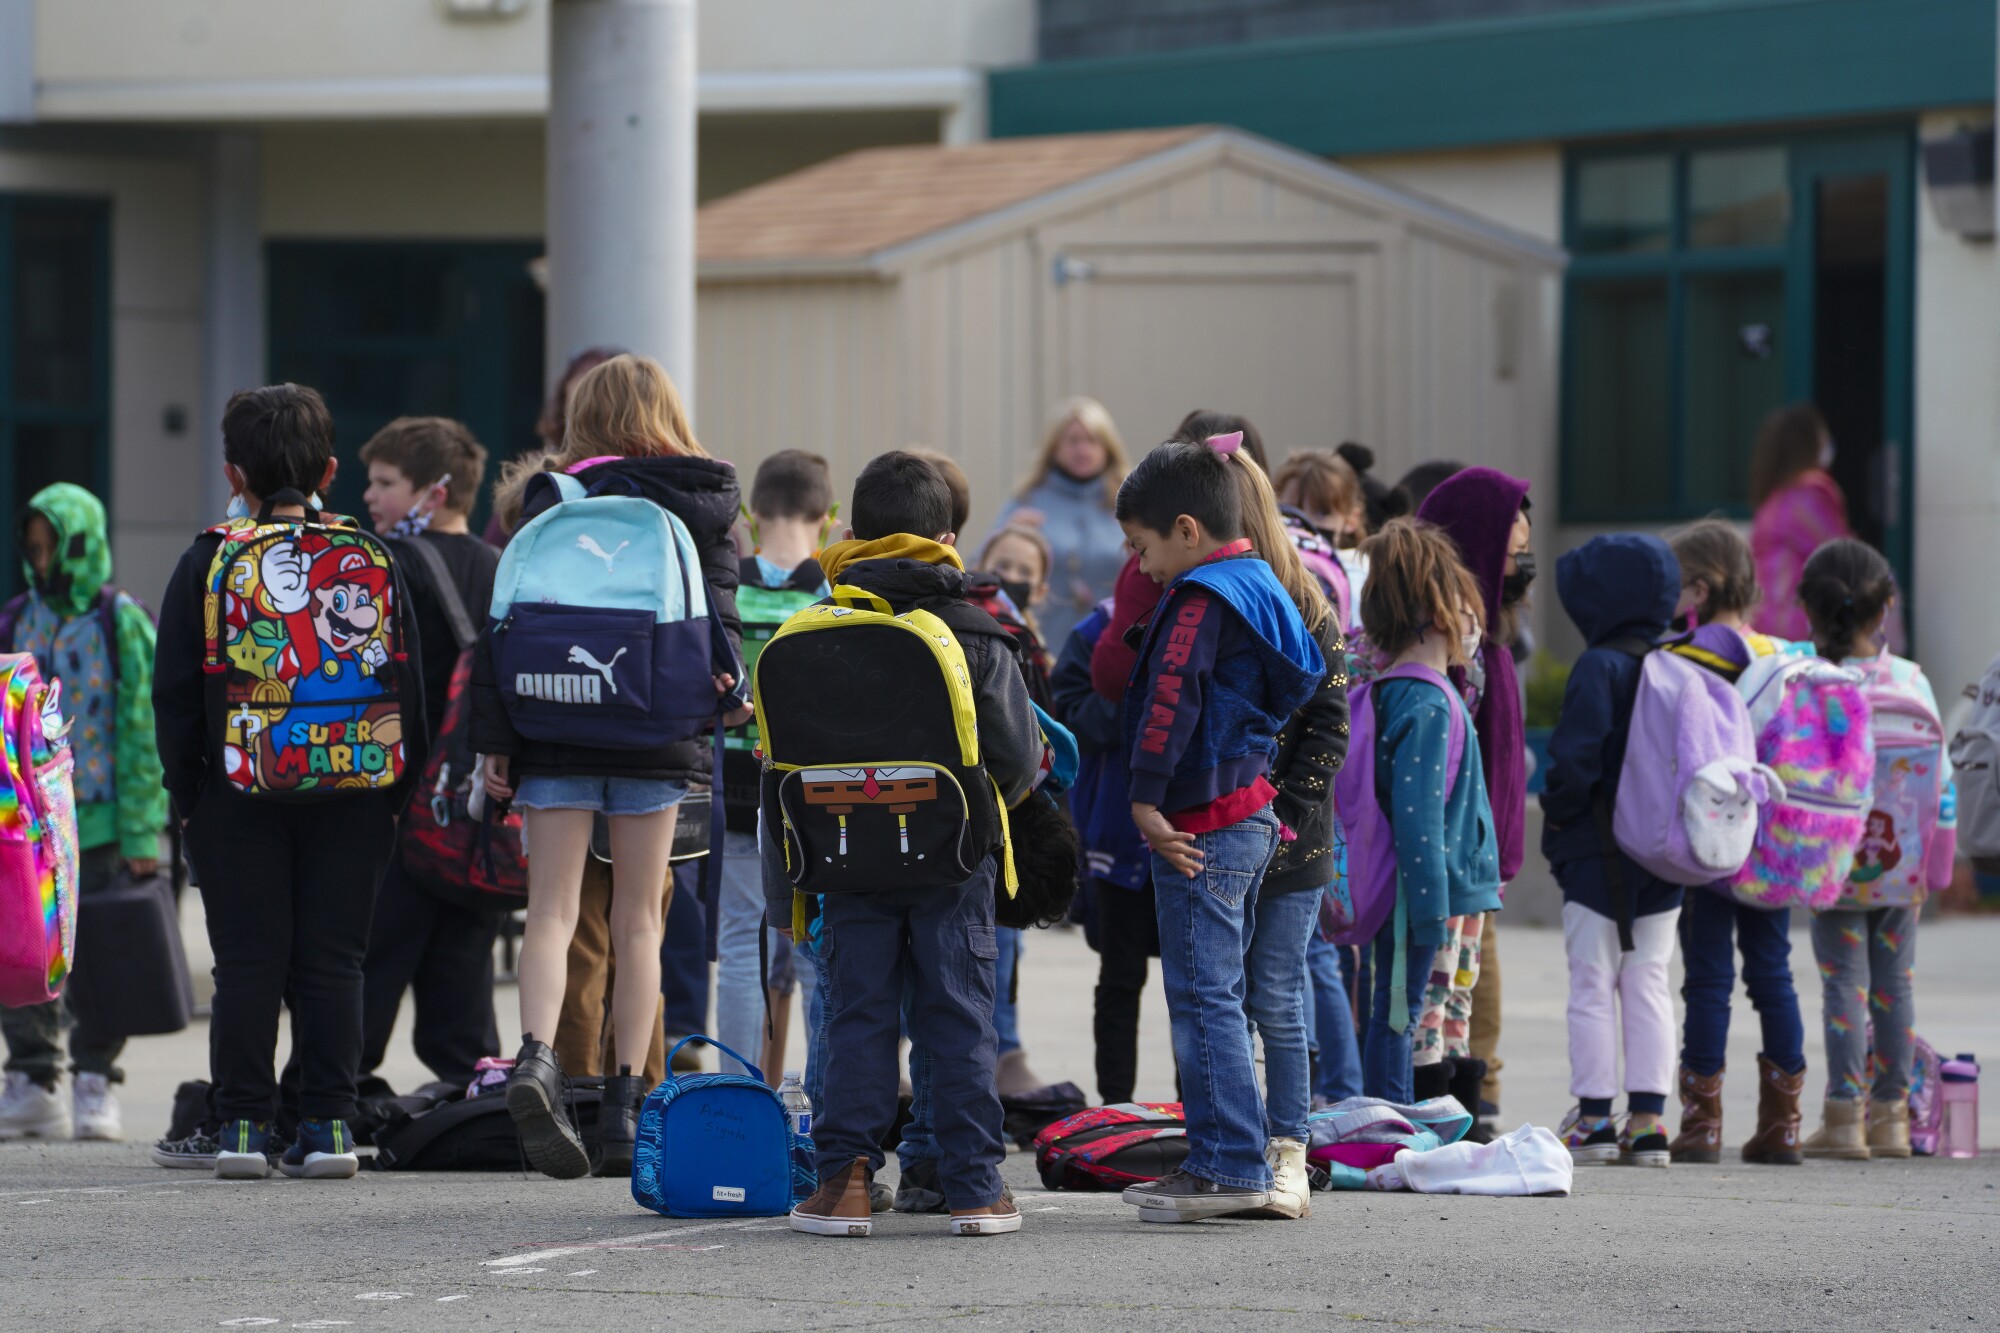 Children line up by assigned class for the start of the school day at Campo Elementary School.